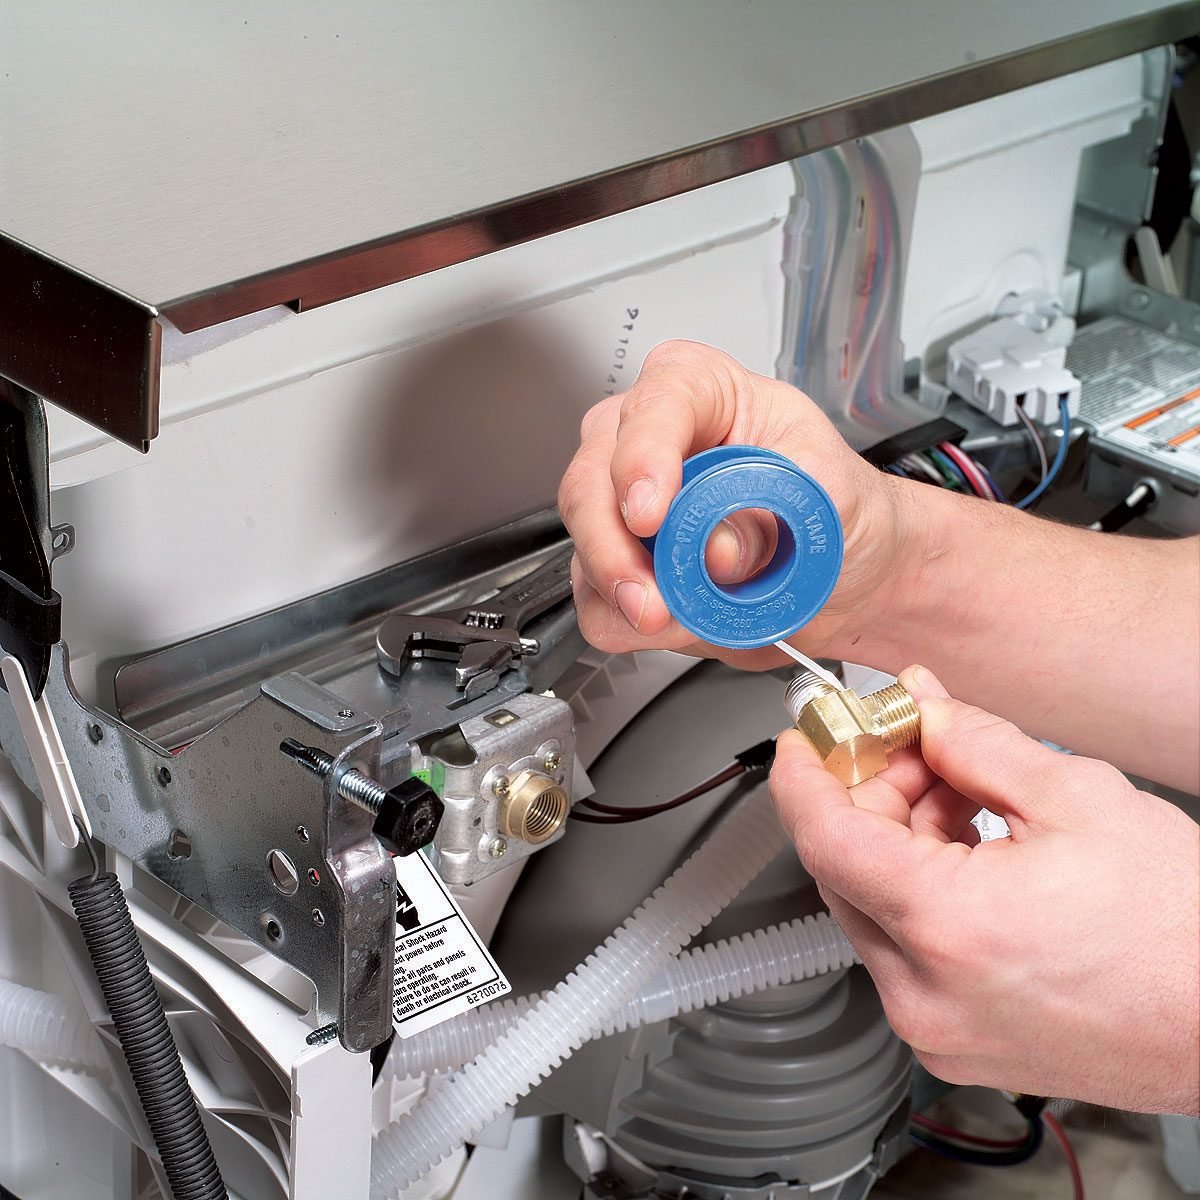 How To Replace A Dishwasher screw on the water valve